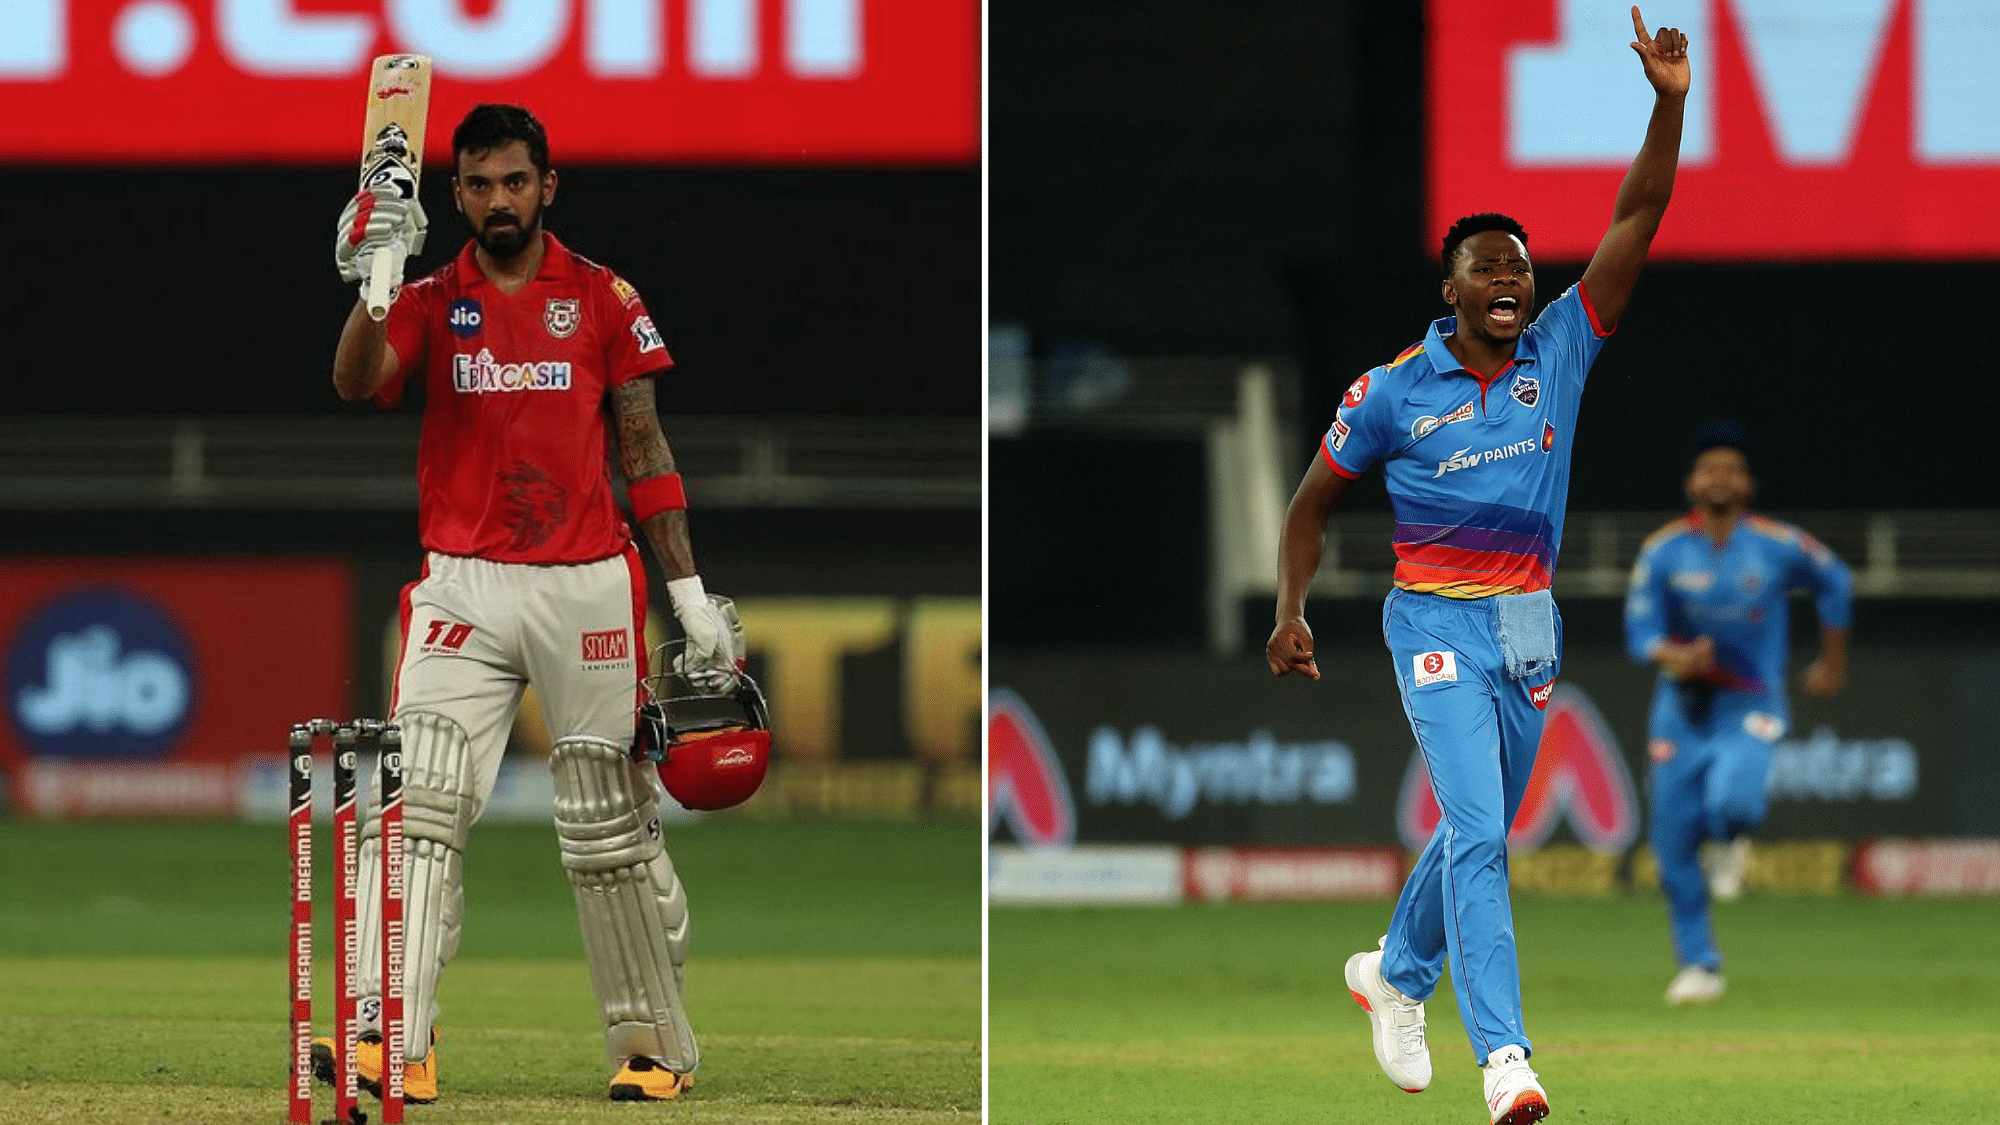 KL Rahul holds on to the Orange Cap with 540 runs, while Kagiso Rabada leads the Purple Cap race with 21 wickets